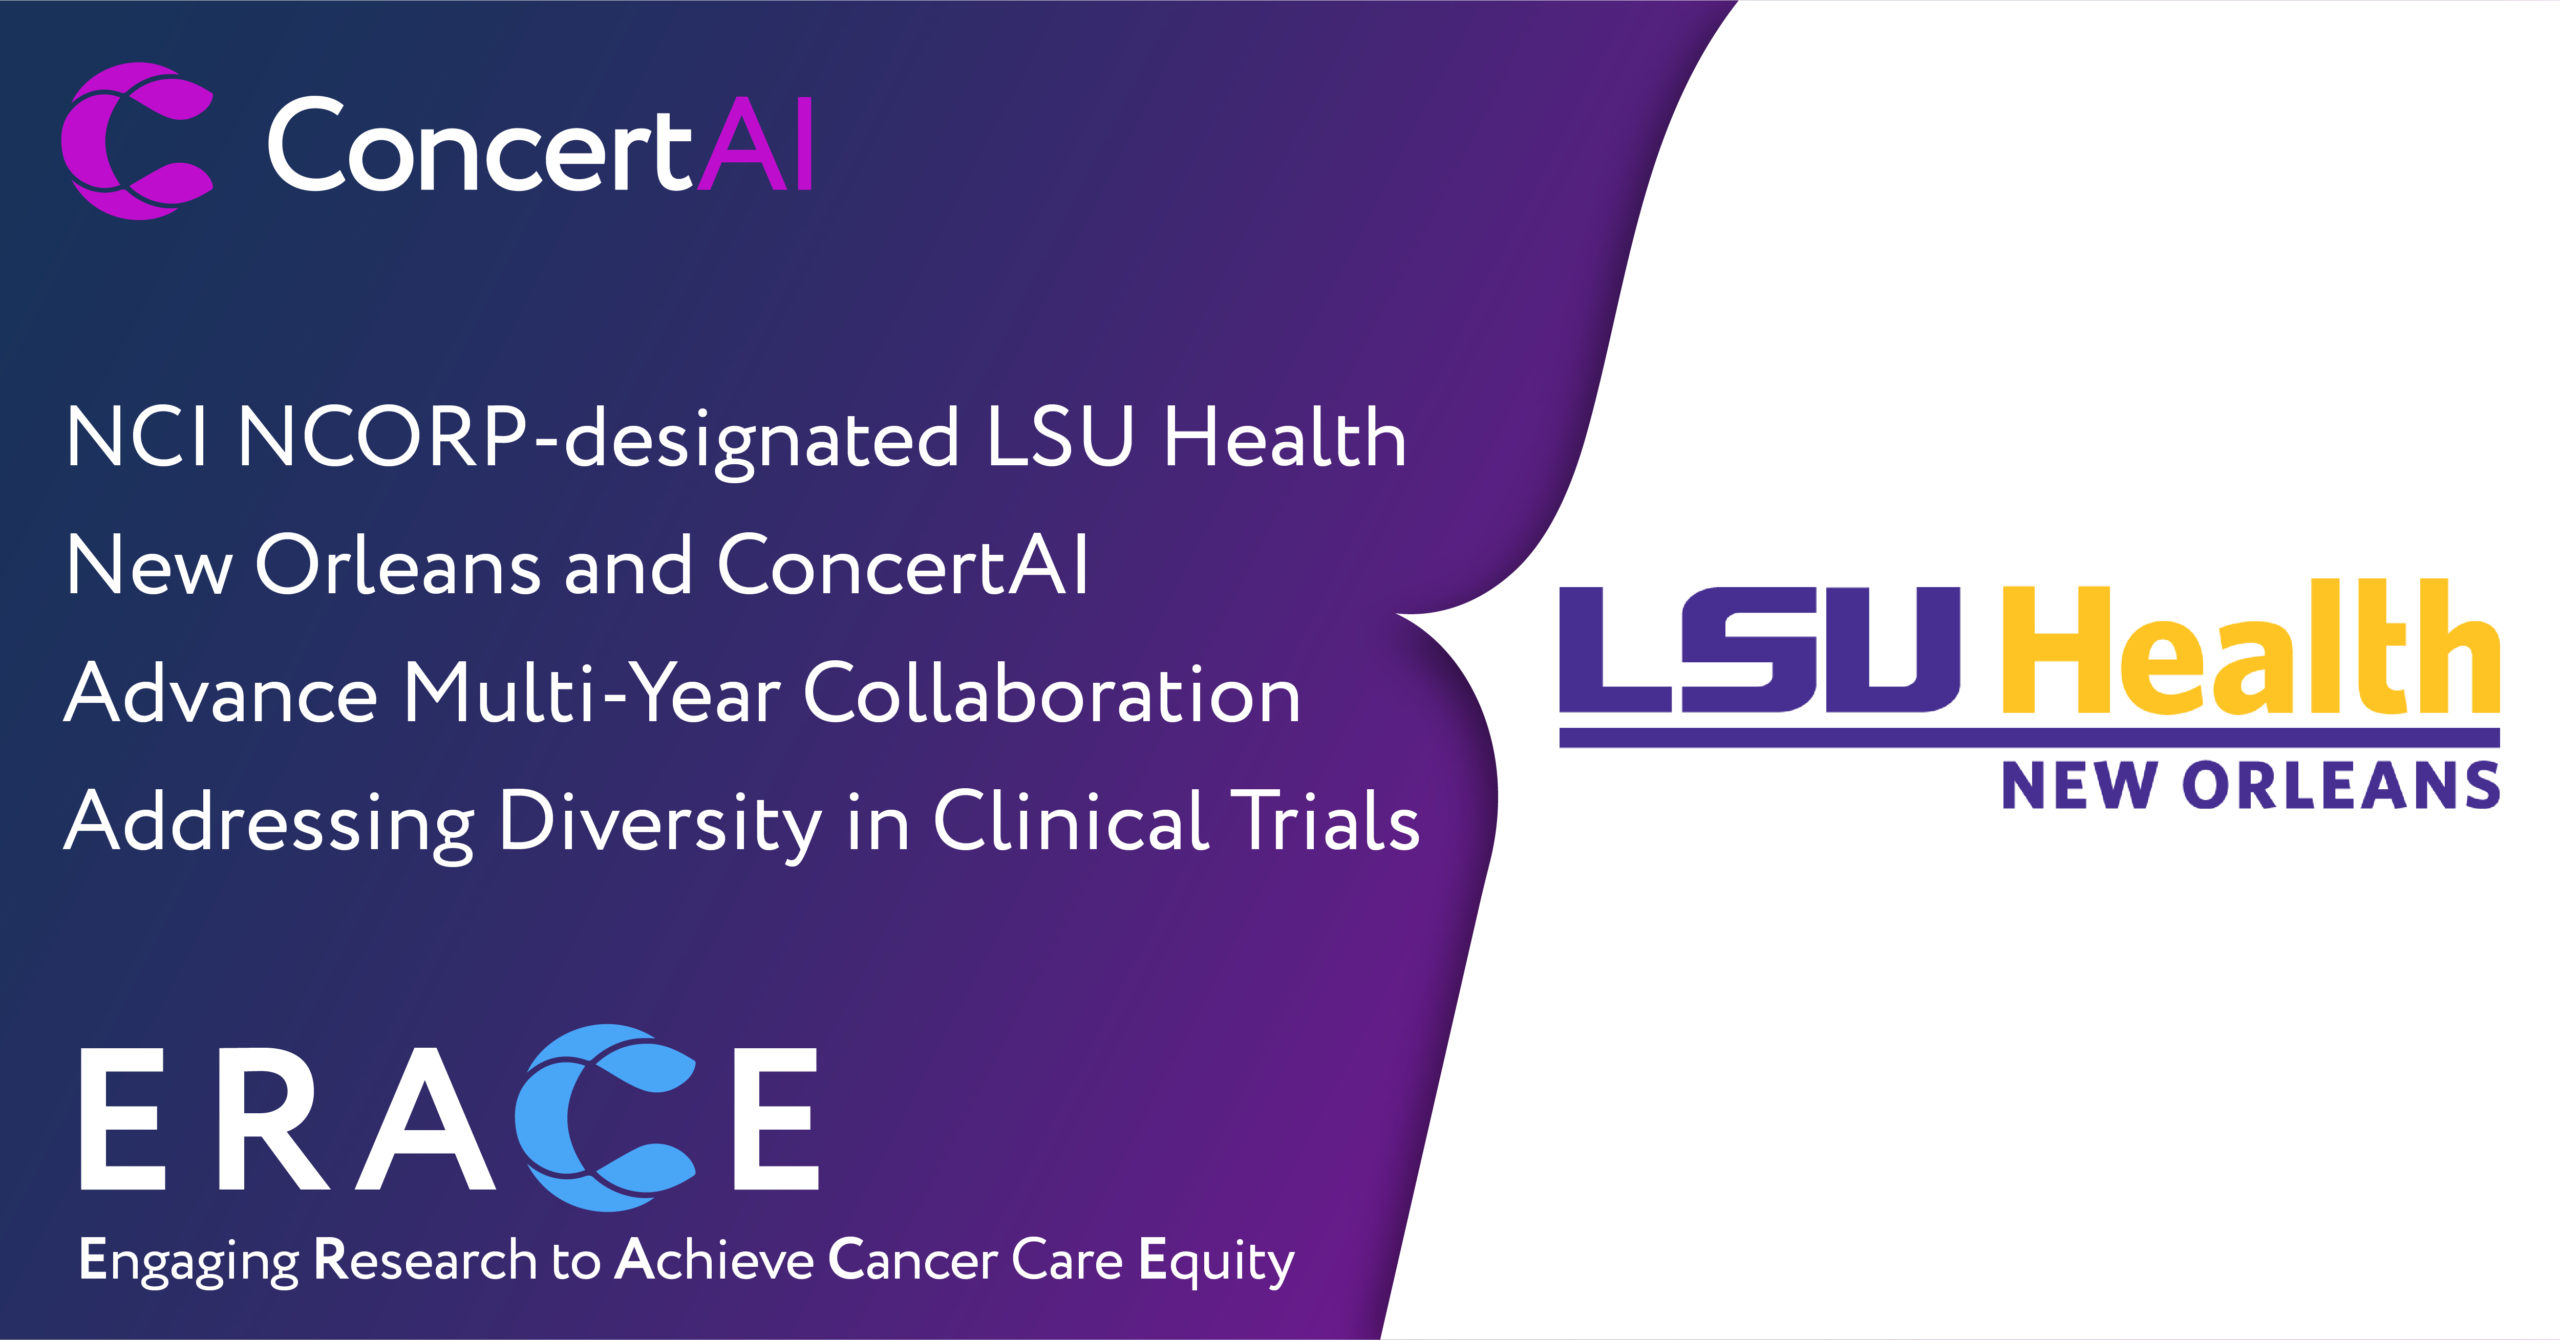 NCI NCORP-designated LSU Health New Orleans and ConcertAI Advance Multi-Year Collaboration Addressing Diversity in Clinical Trials